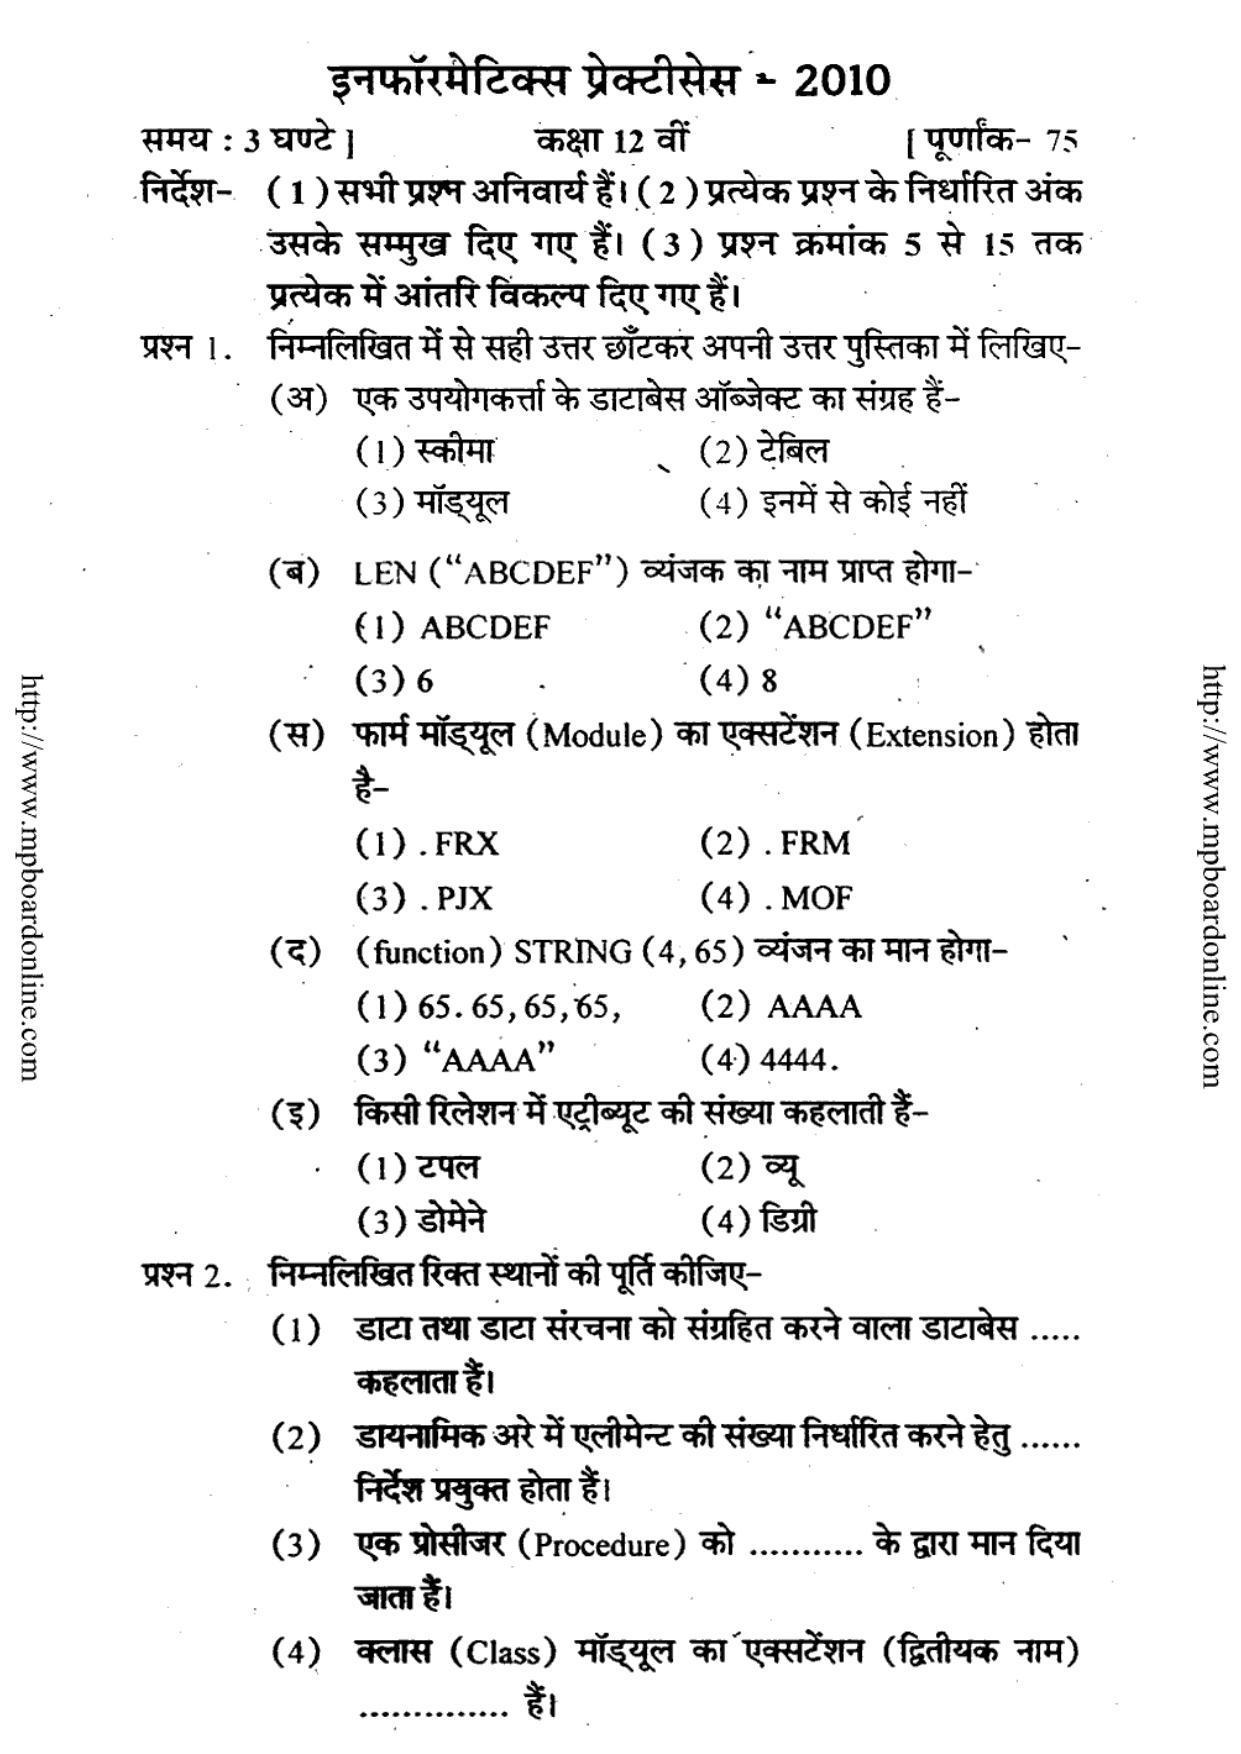 MP Board Class 12 Informatics Practices 2010 Question Paper - Page 1